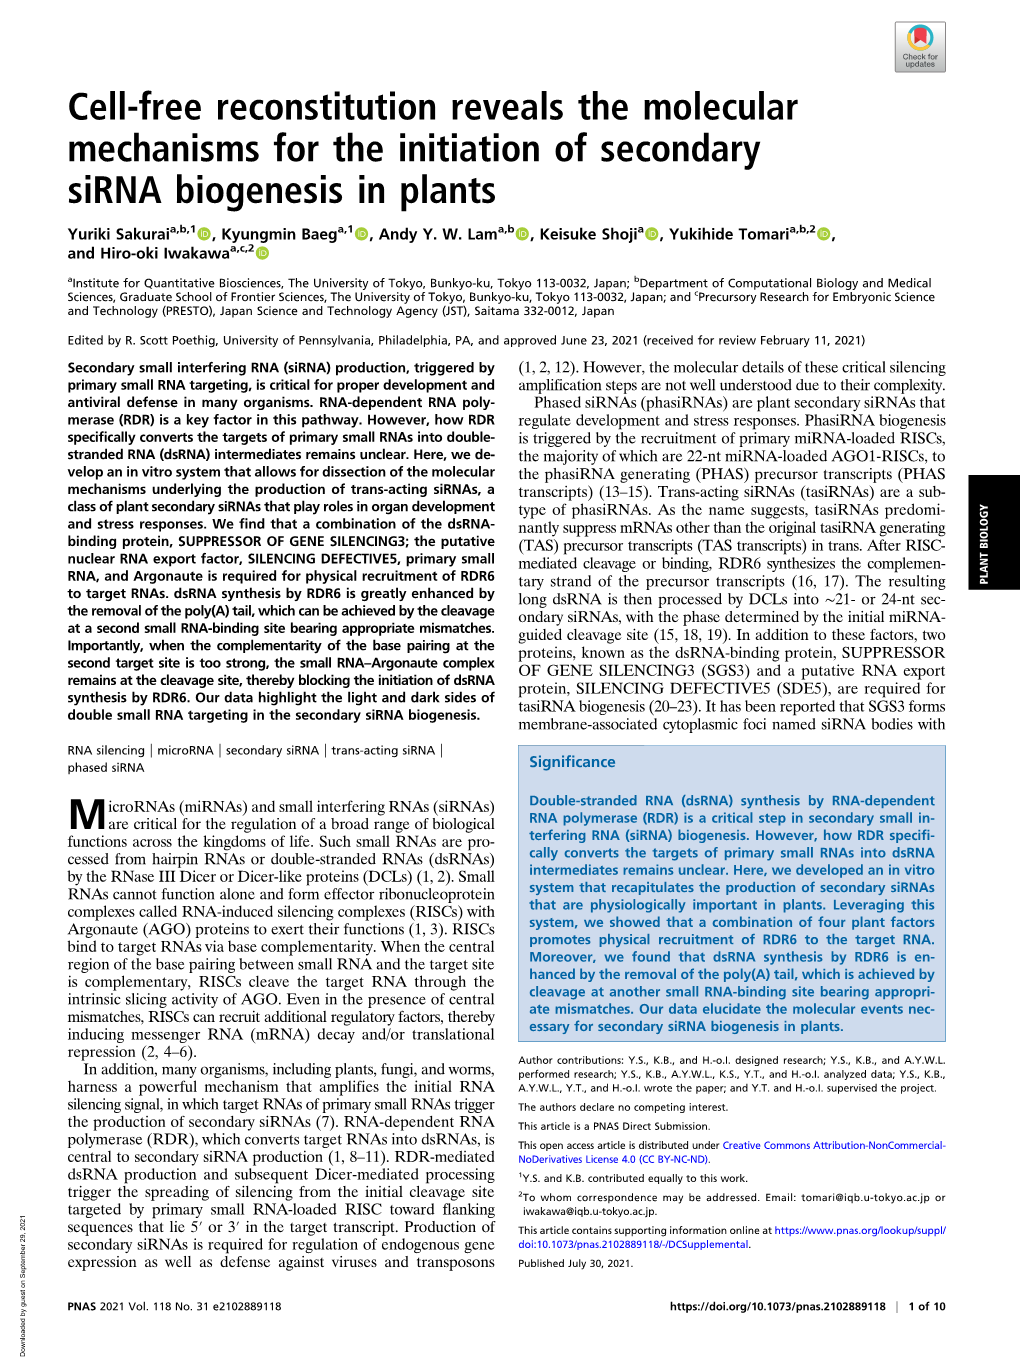 Cell-Free Reconstitution Reveals the Molecular Mechanisms for the Initiation of Secondary Sirna Biogenesis in Plants